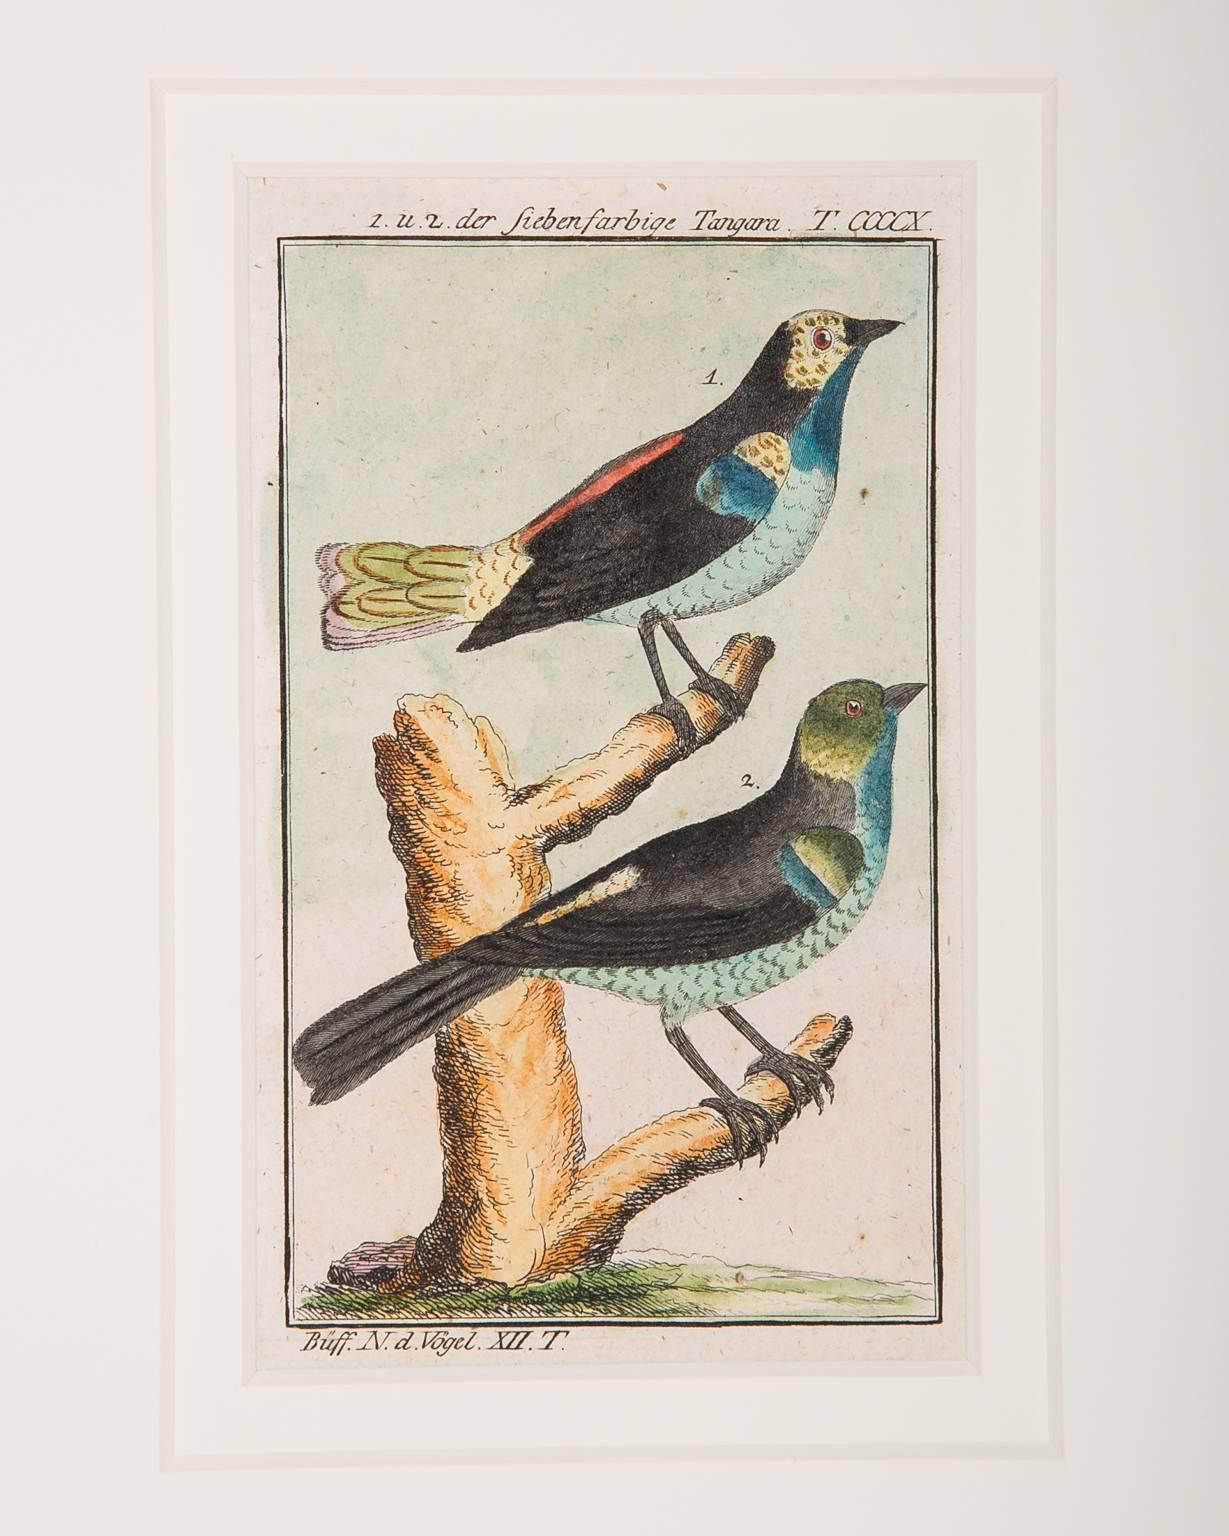 Hundreds of individual bird scenes captured on paper in the style of the Audubon bird engravings. These small, gem like, hand-colored engravings of birds represent the rare and compelling the ornithological drawings of the influential ornithologist,